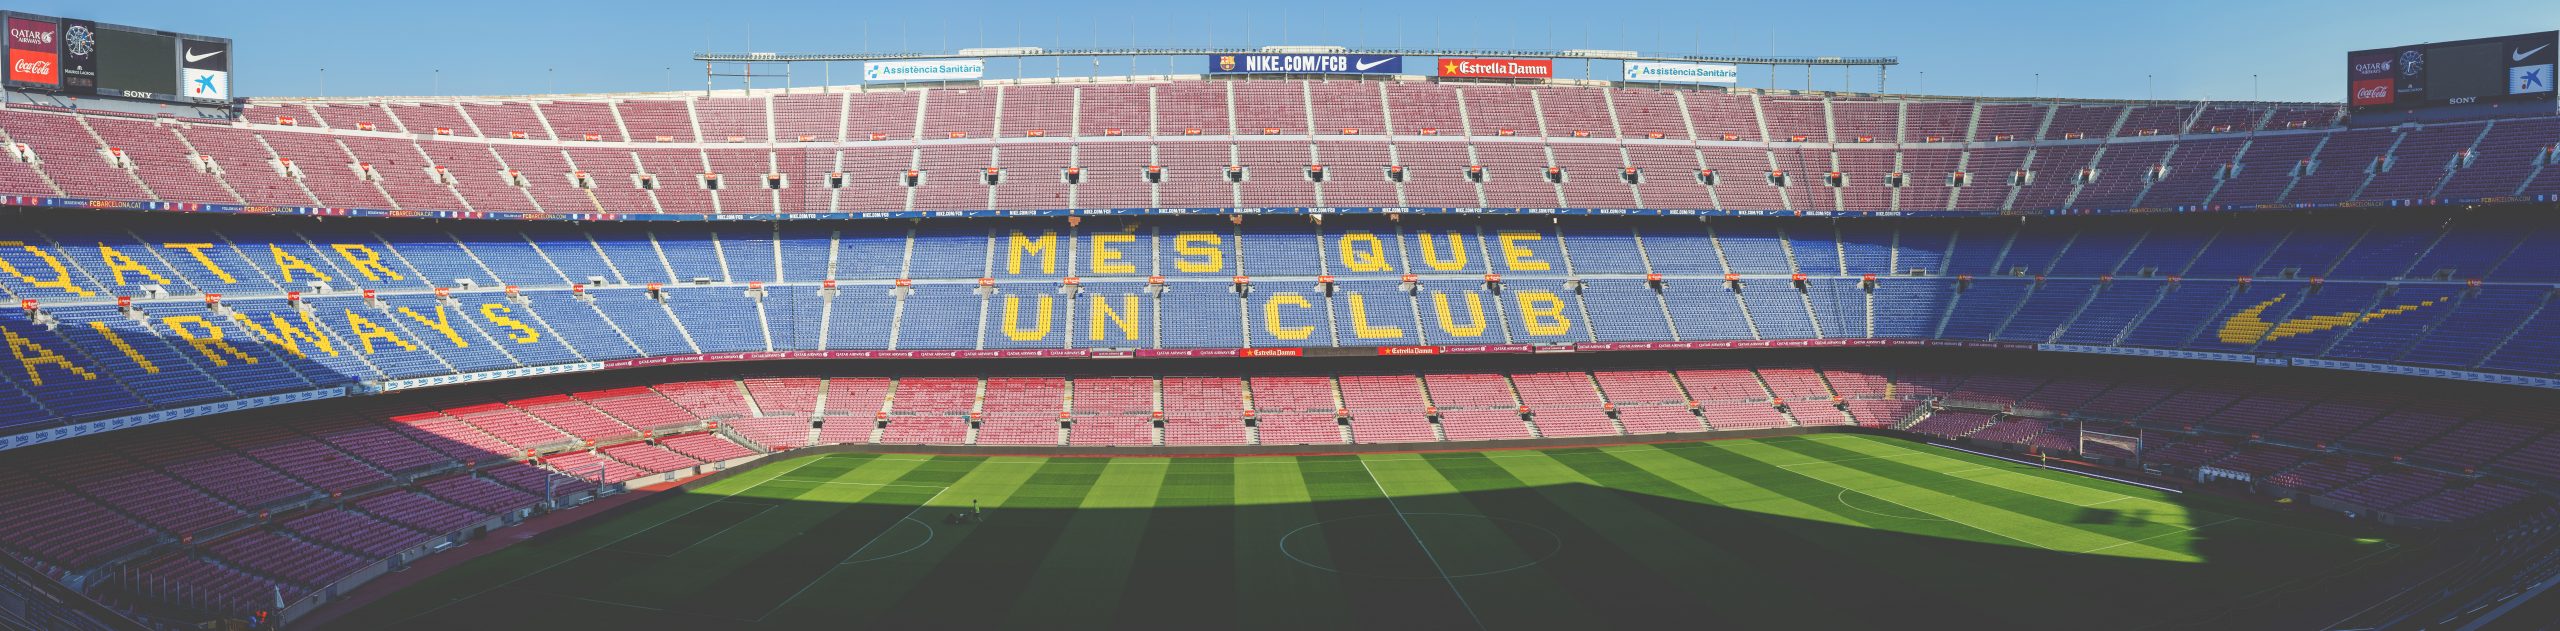 famous buildings in Barcelona fun facts about barcelona Camp Nou